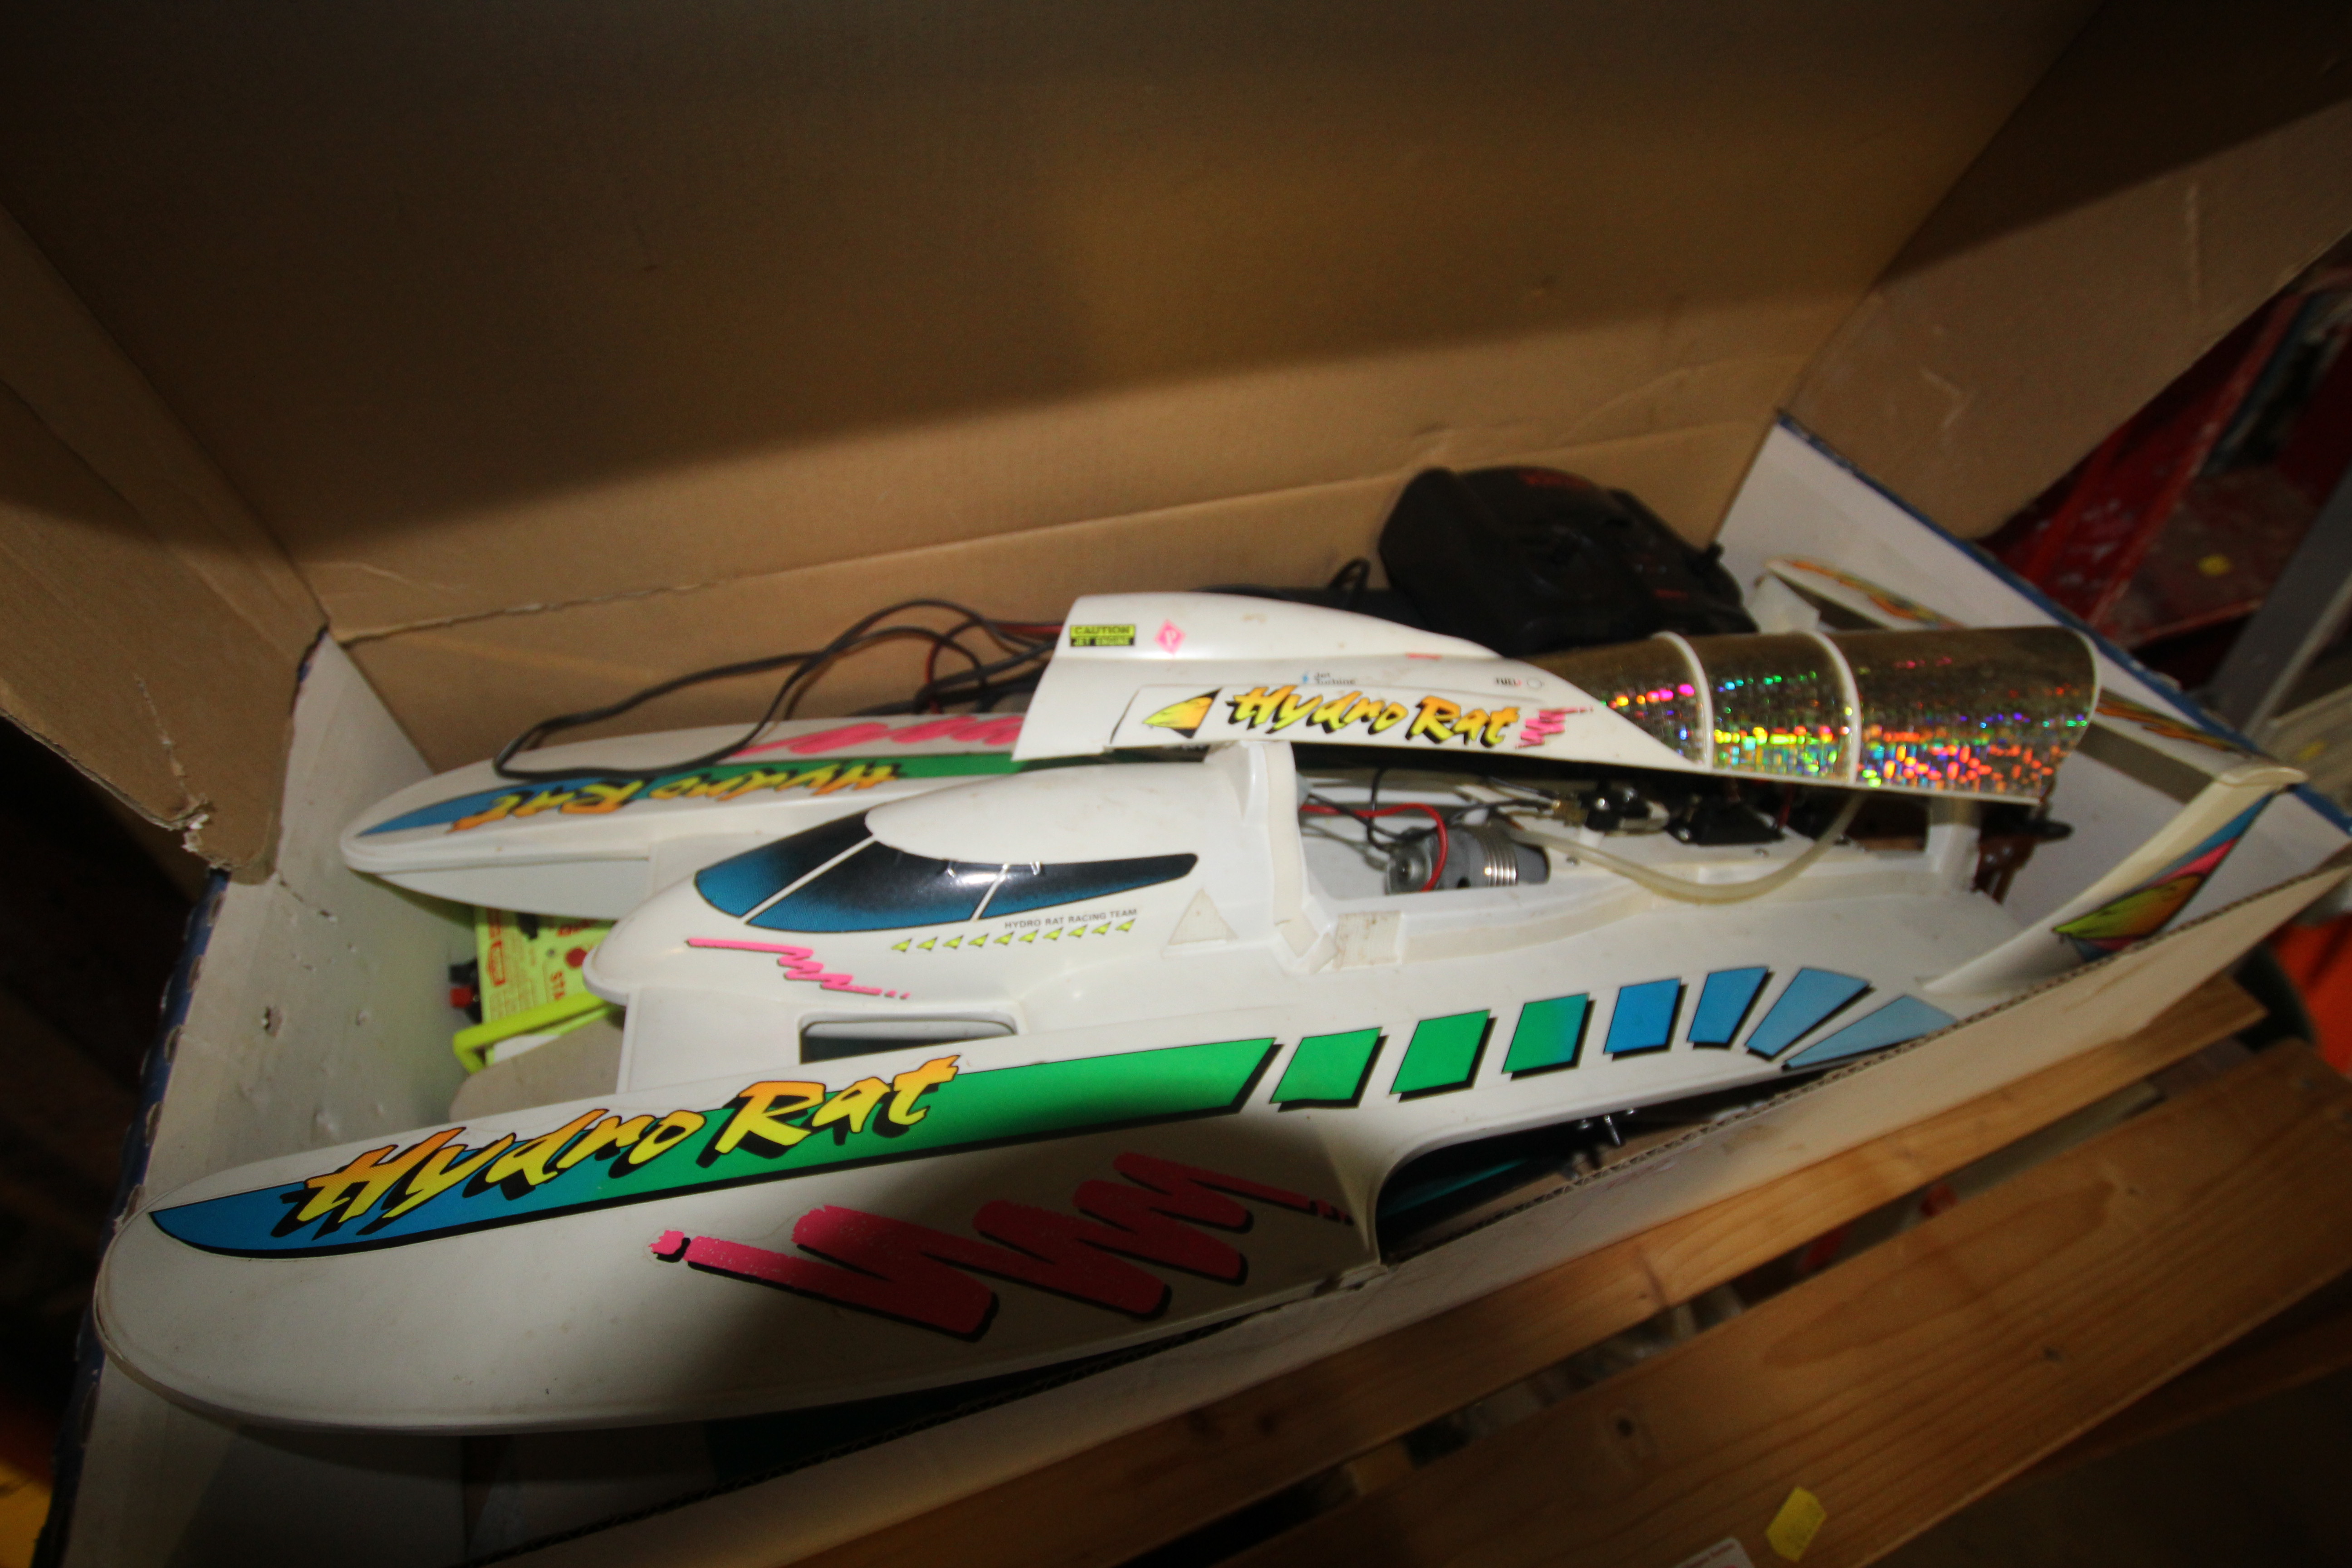 A Hydro Rat 740 radio controlled hydroplane racer - Image 2 of 2